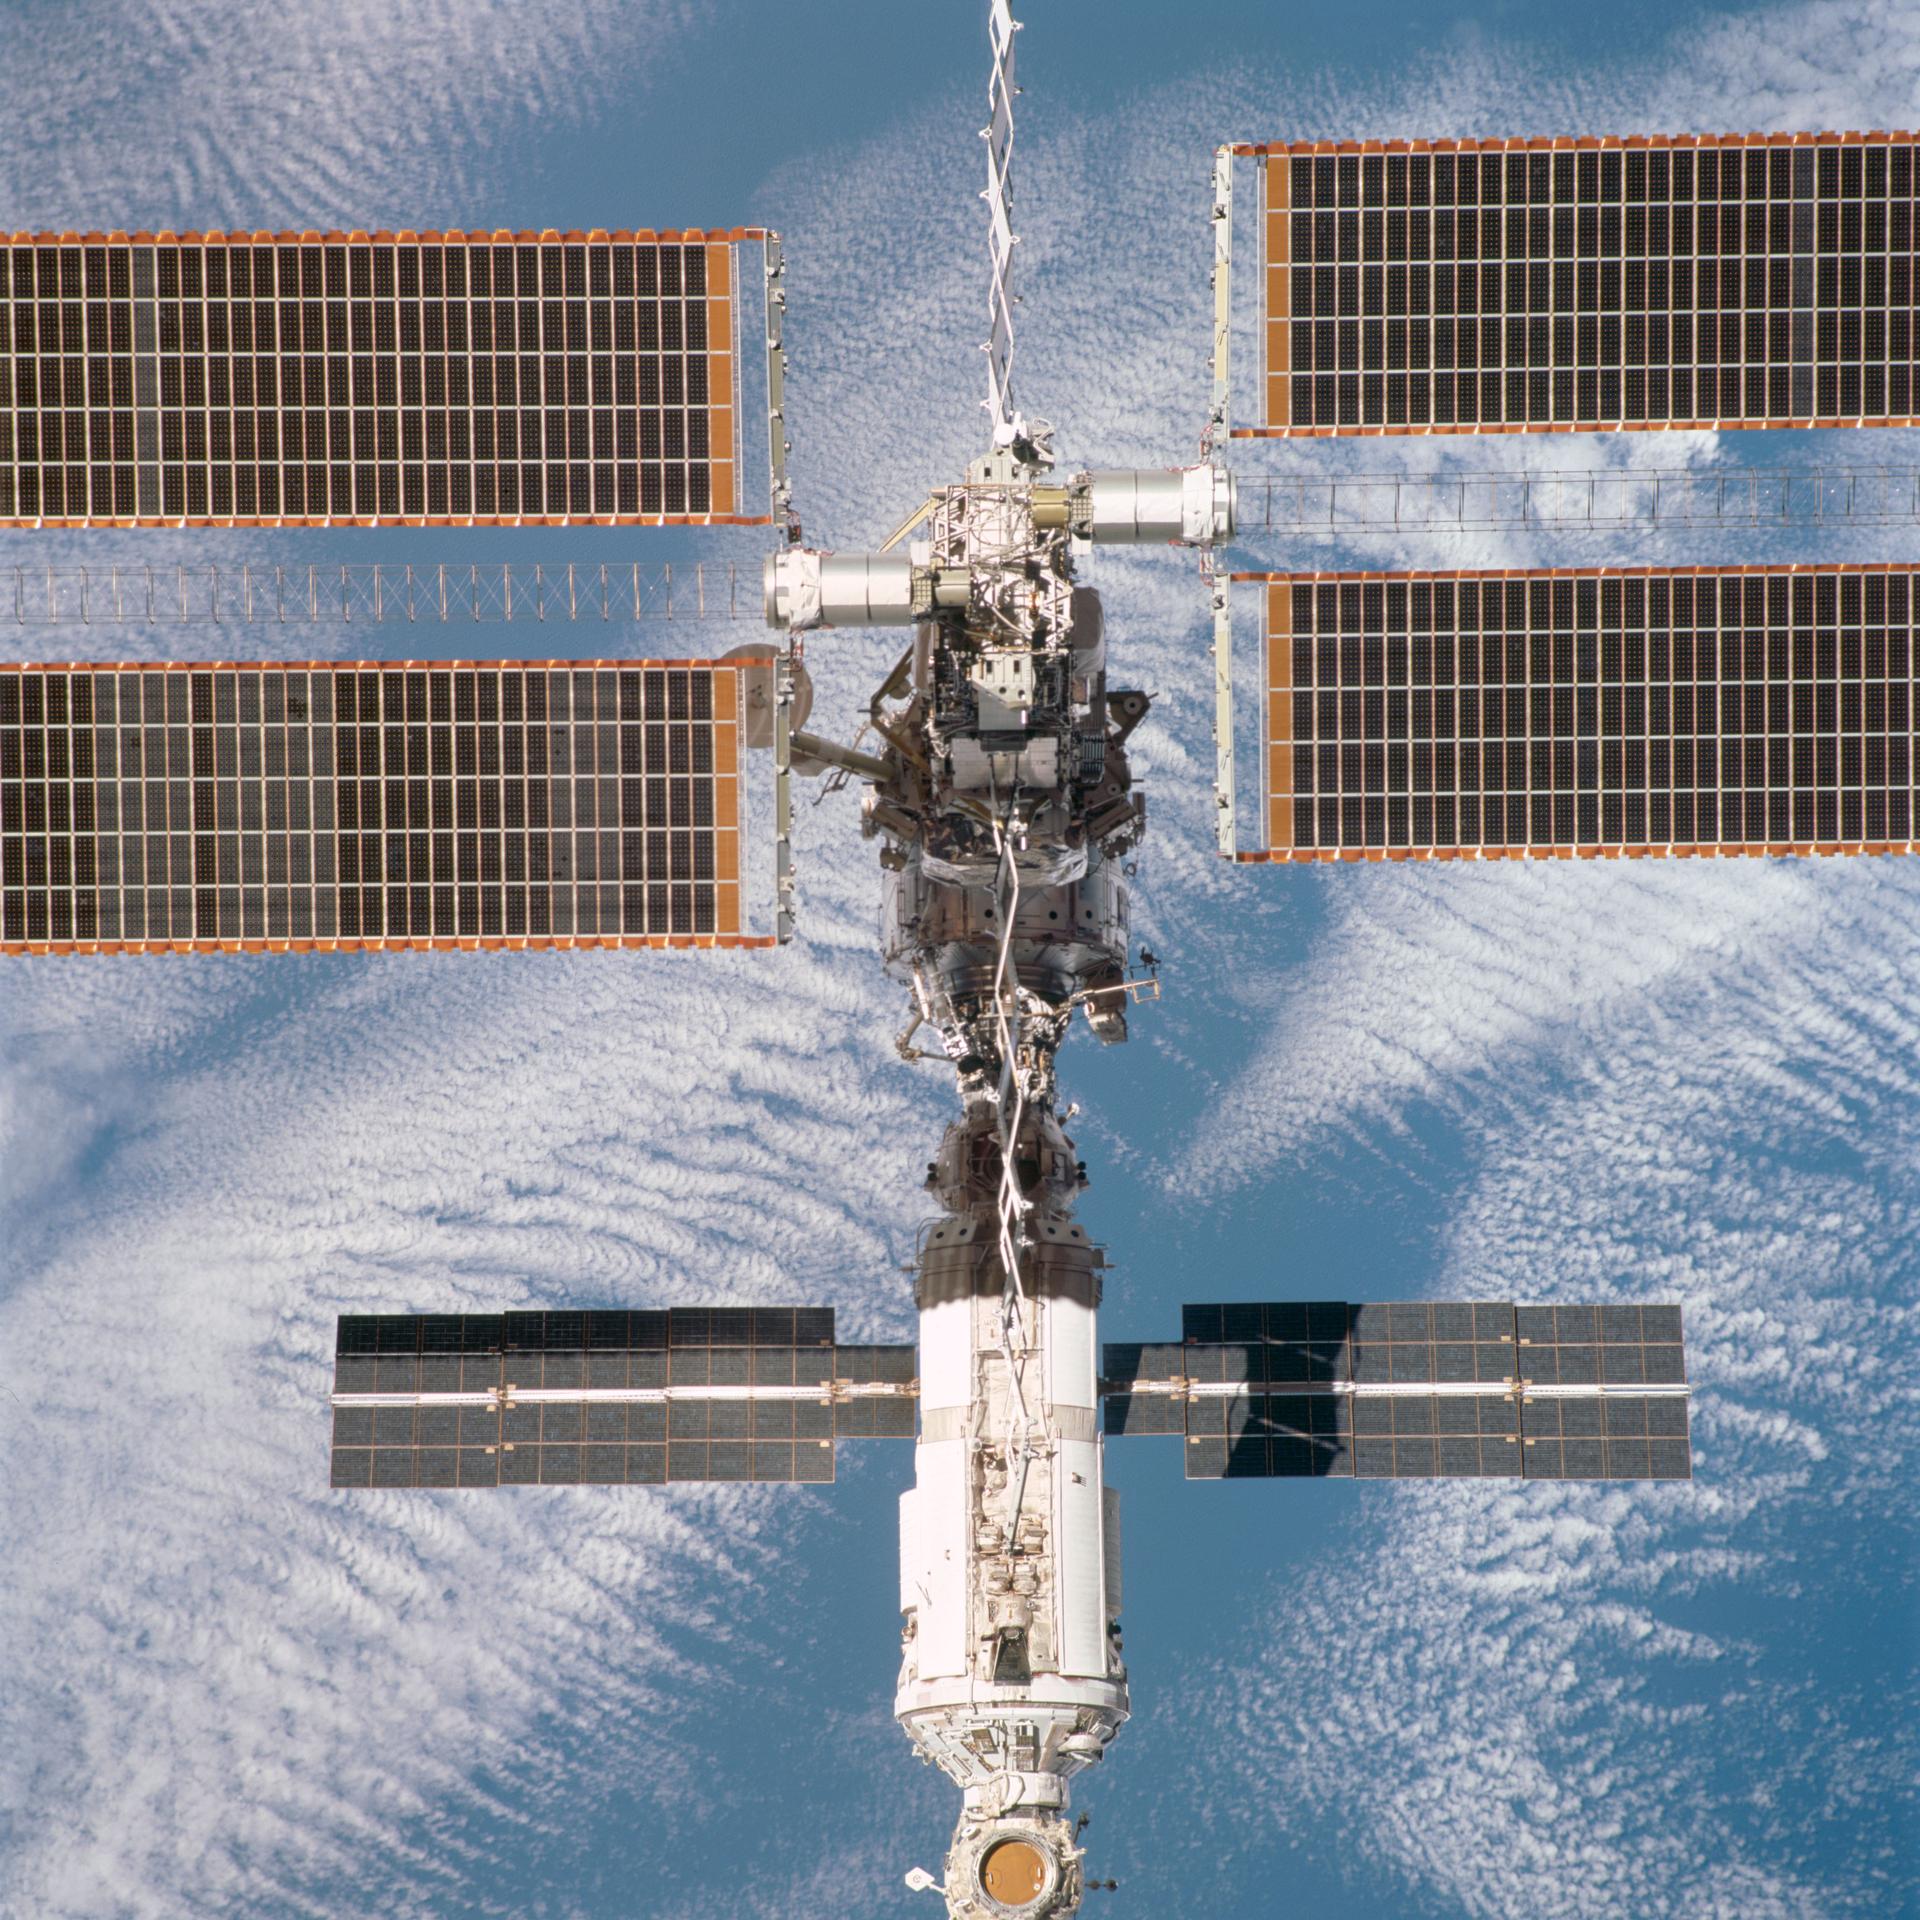 81: The ISS Gets New Wings!